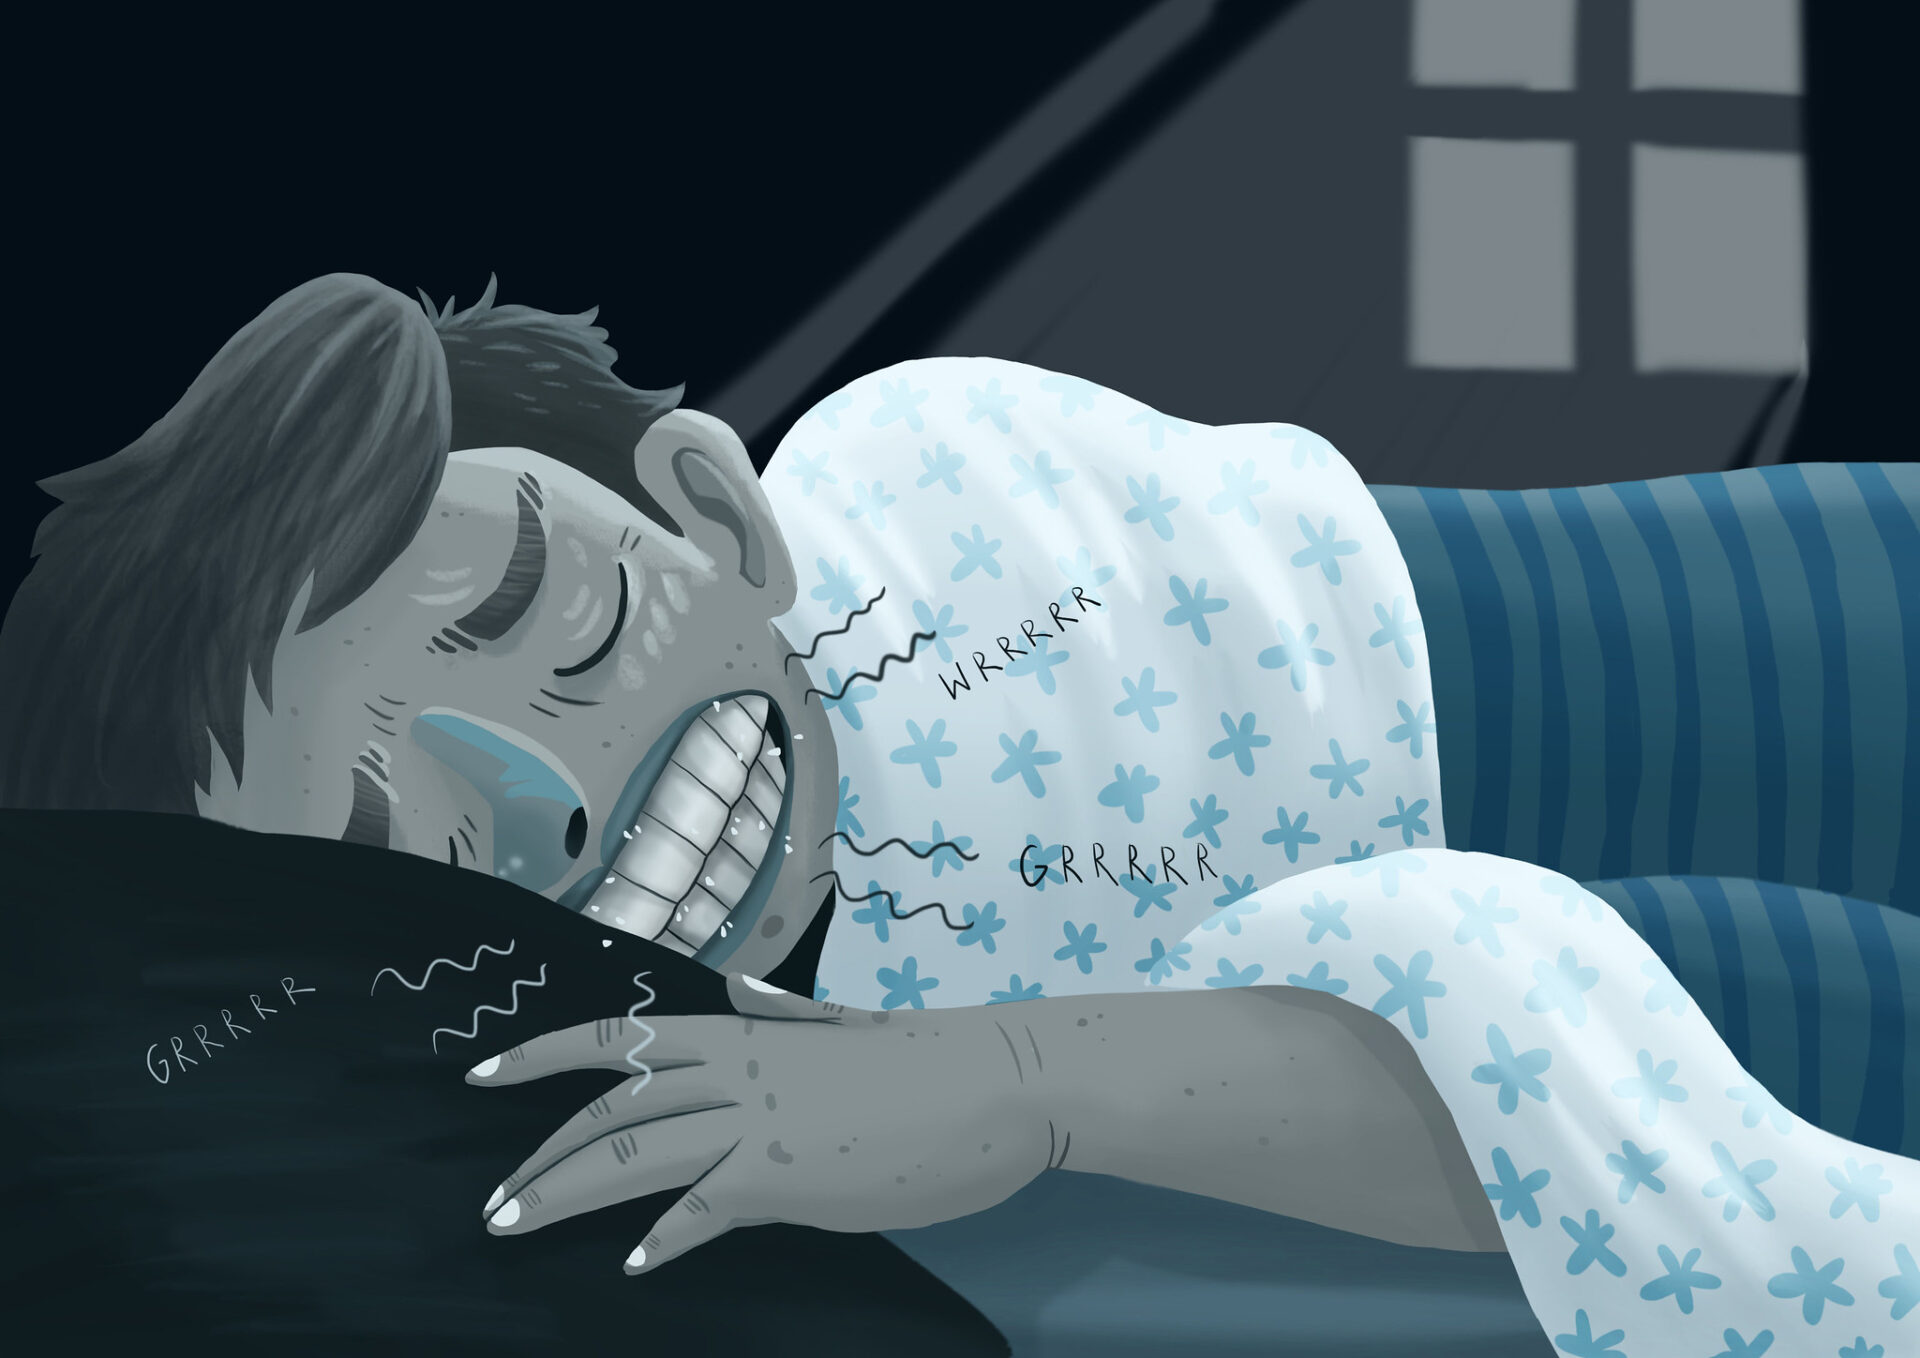 Cartoon drawing of a man grinding and clenching his teeth while sleeping